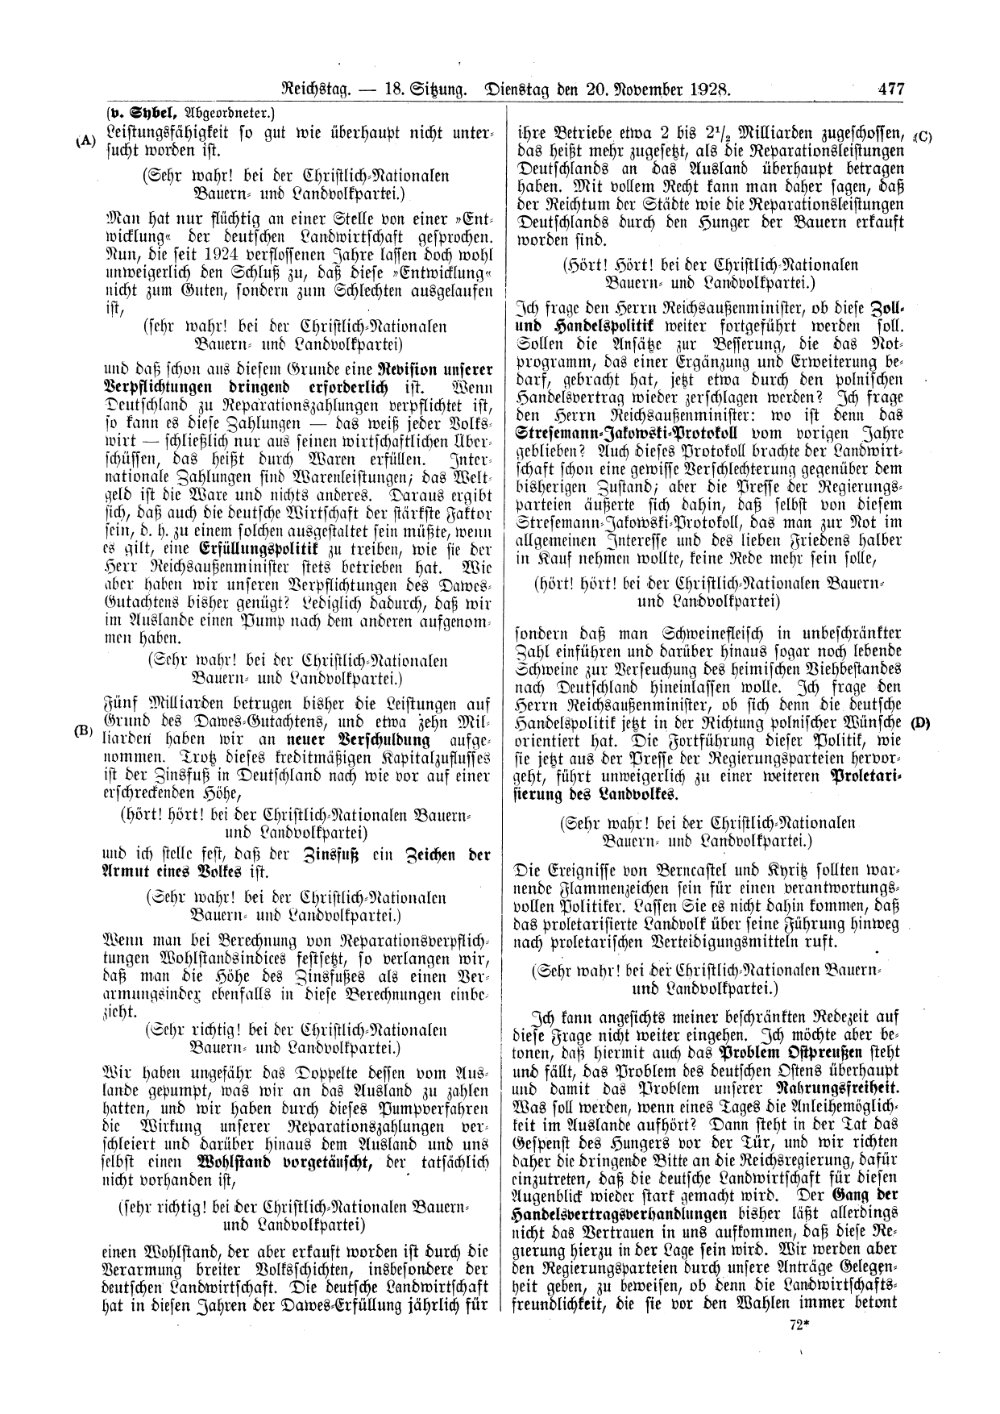 Scan of page 477